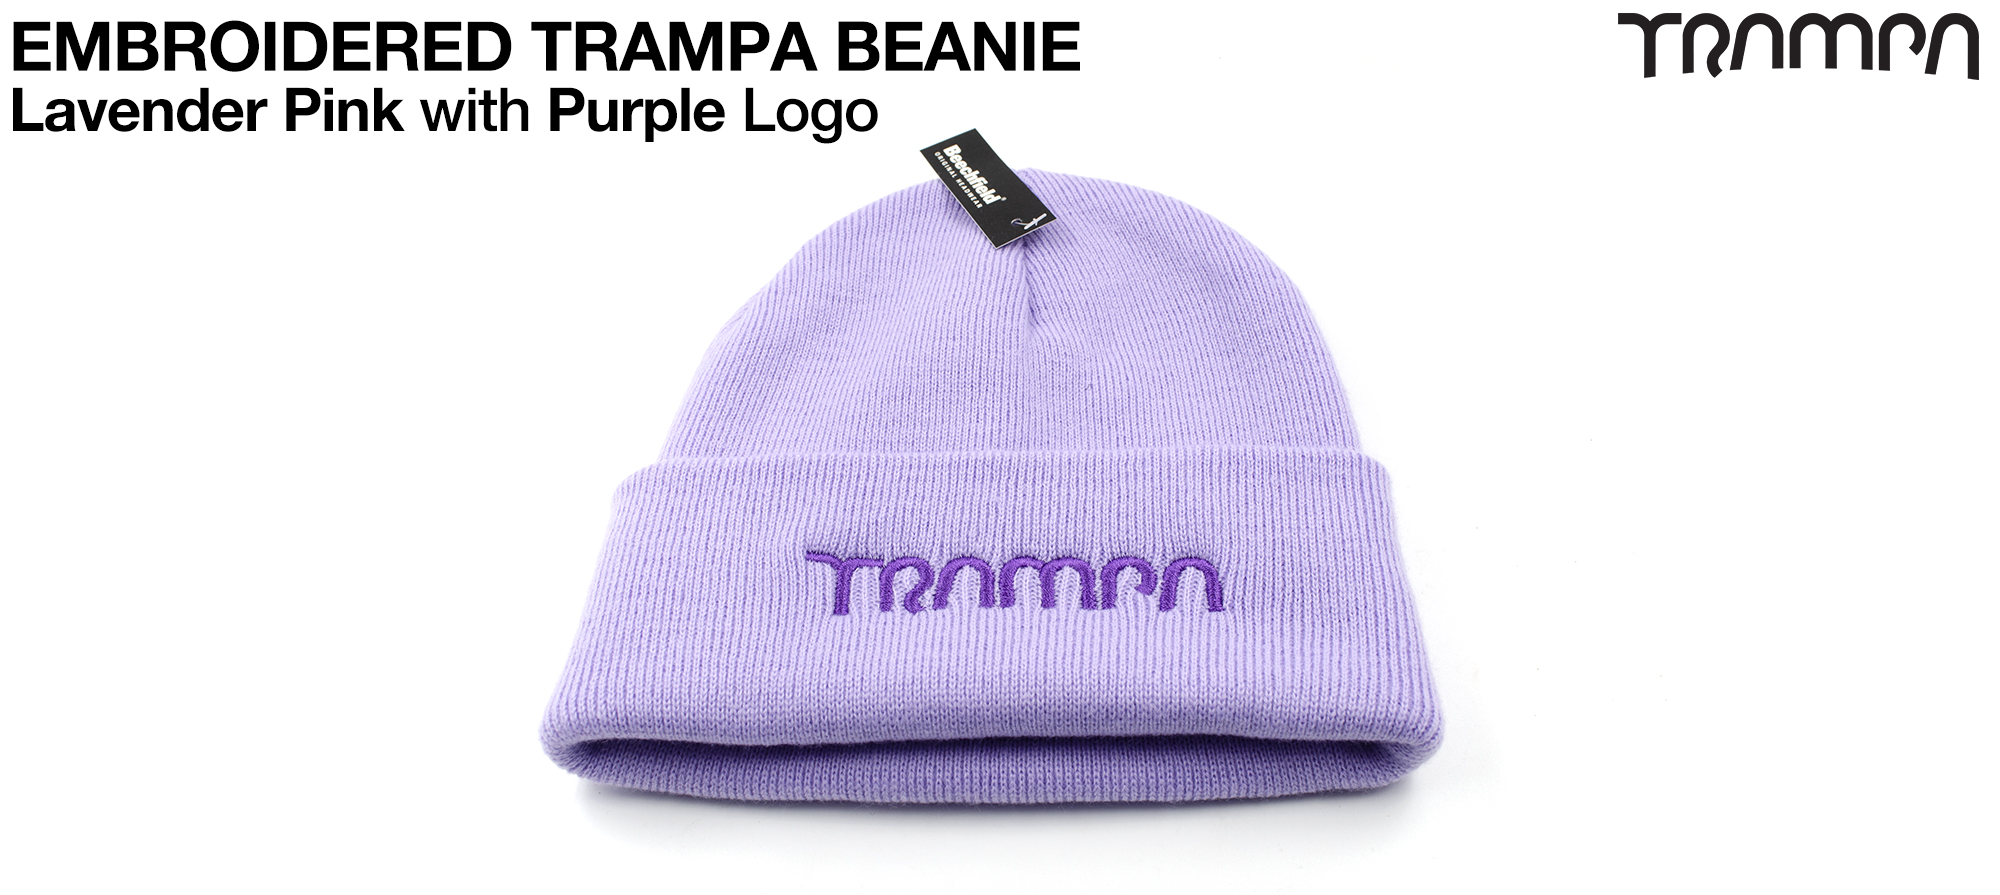 Lavender PINK Woolly hat with PURPLE TRAMPA logo